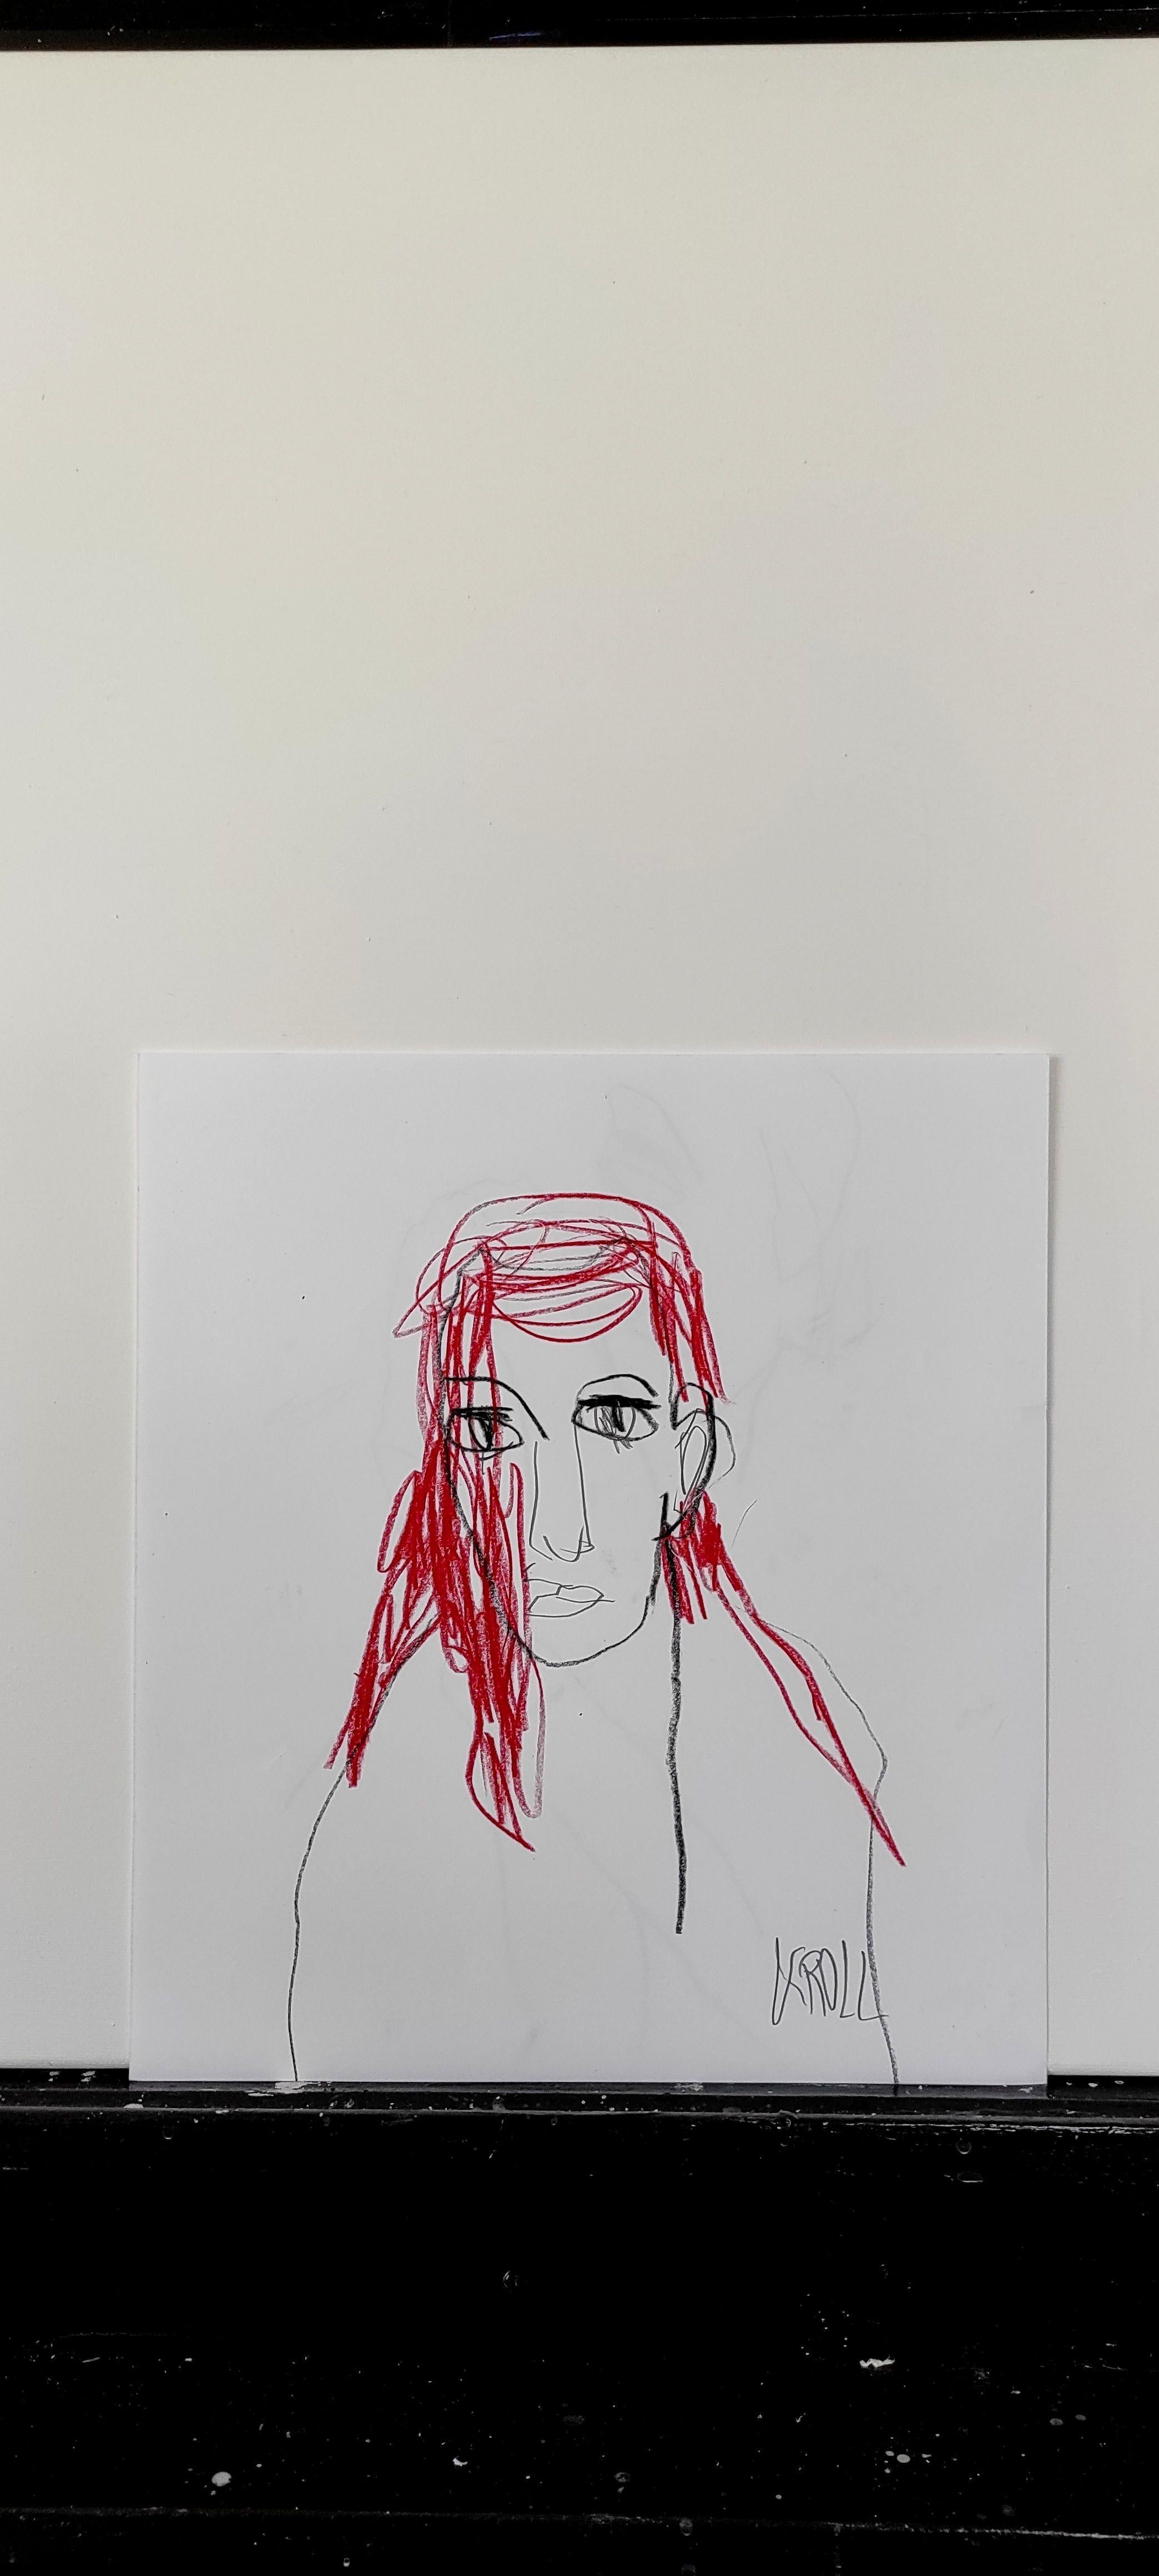 Portrait with red hair, Drawing, Pencil/Colored Pencil on Paper - Expressionist Art by Barbara Kroll